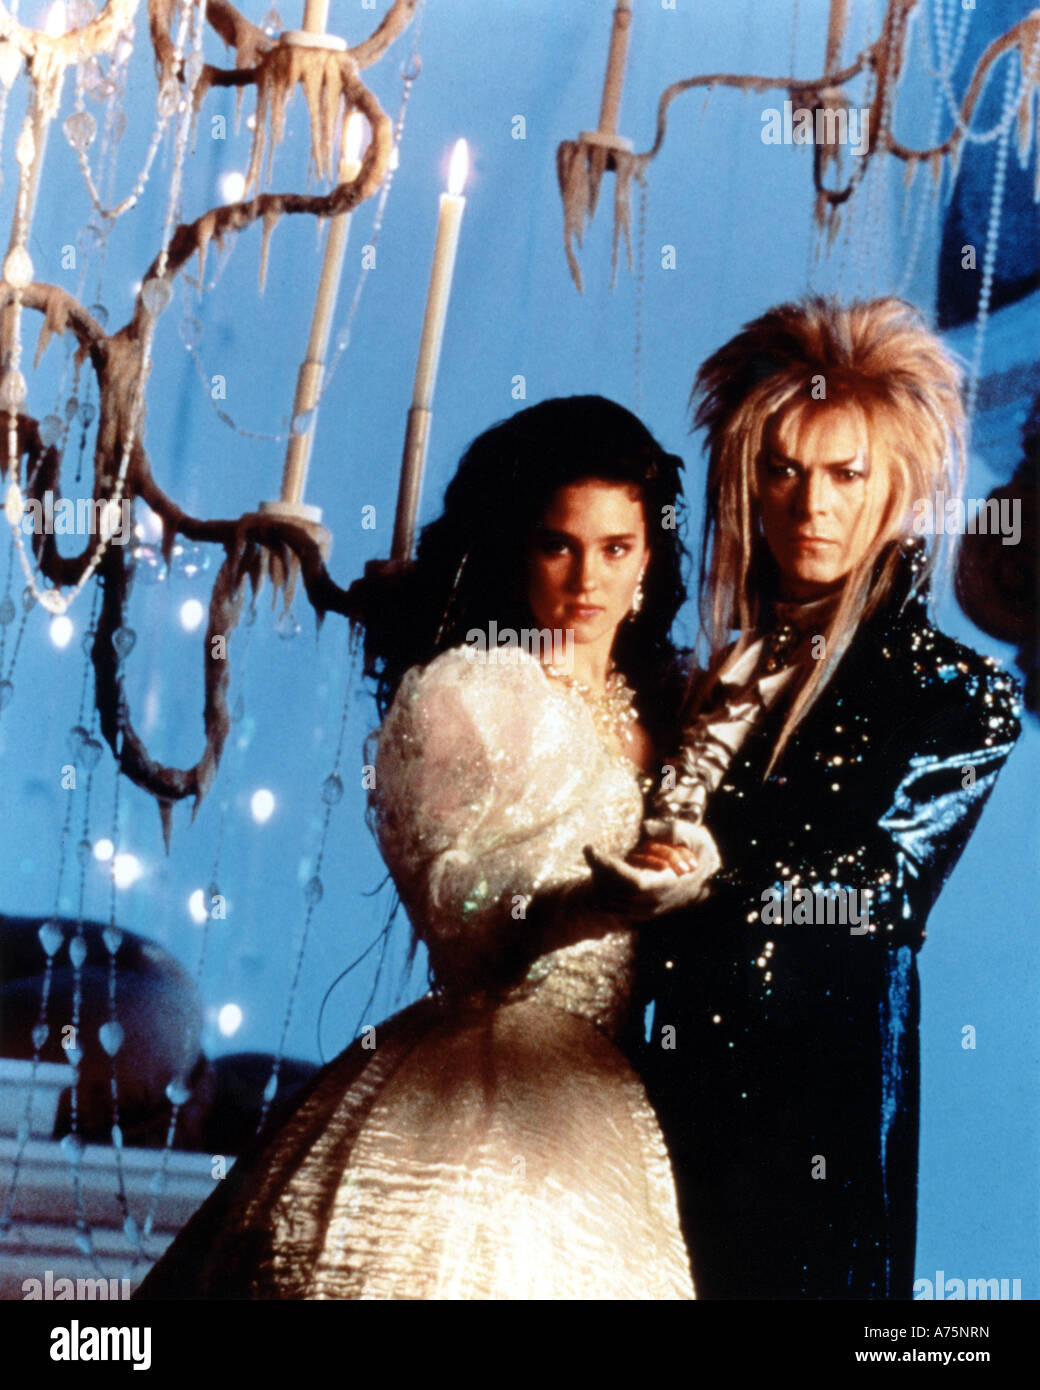 N3249 NEW IMAGE!! Labyrinth David Bowie & Jennifer Connelly UNSIGNED photo 